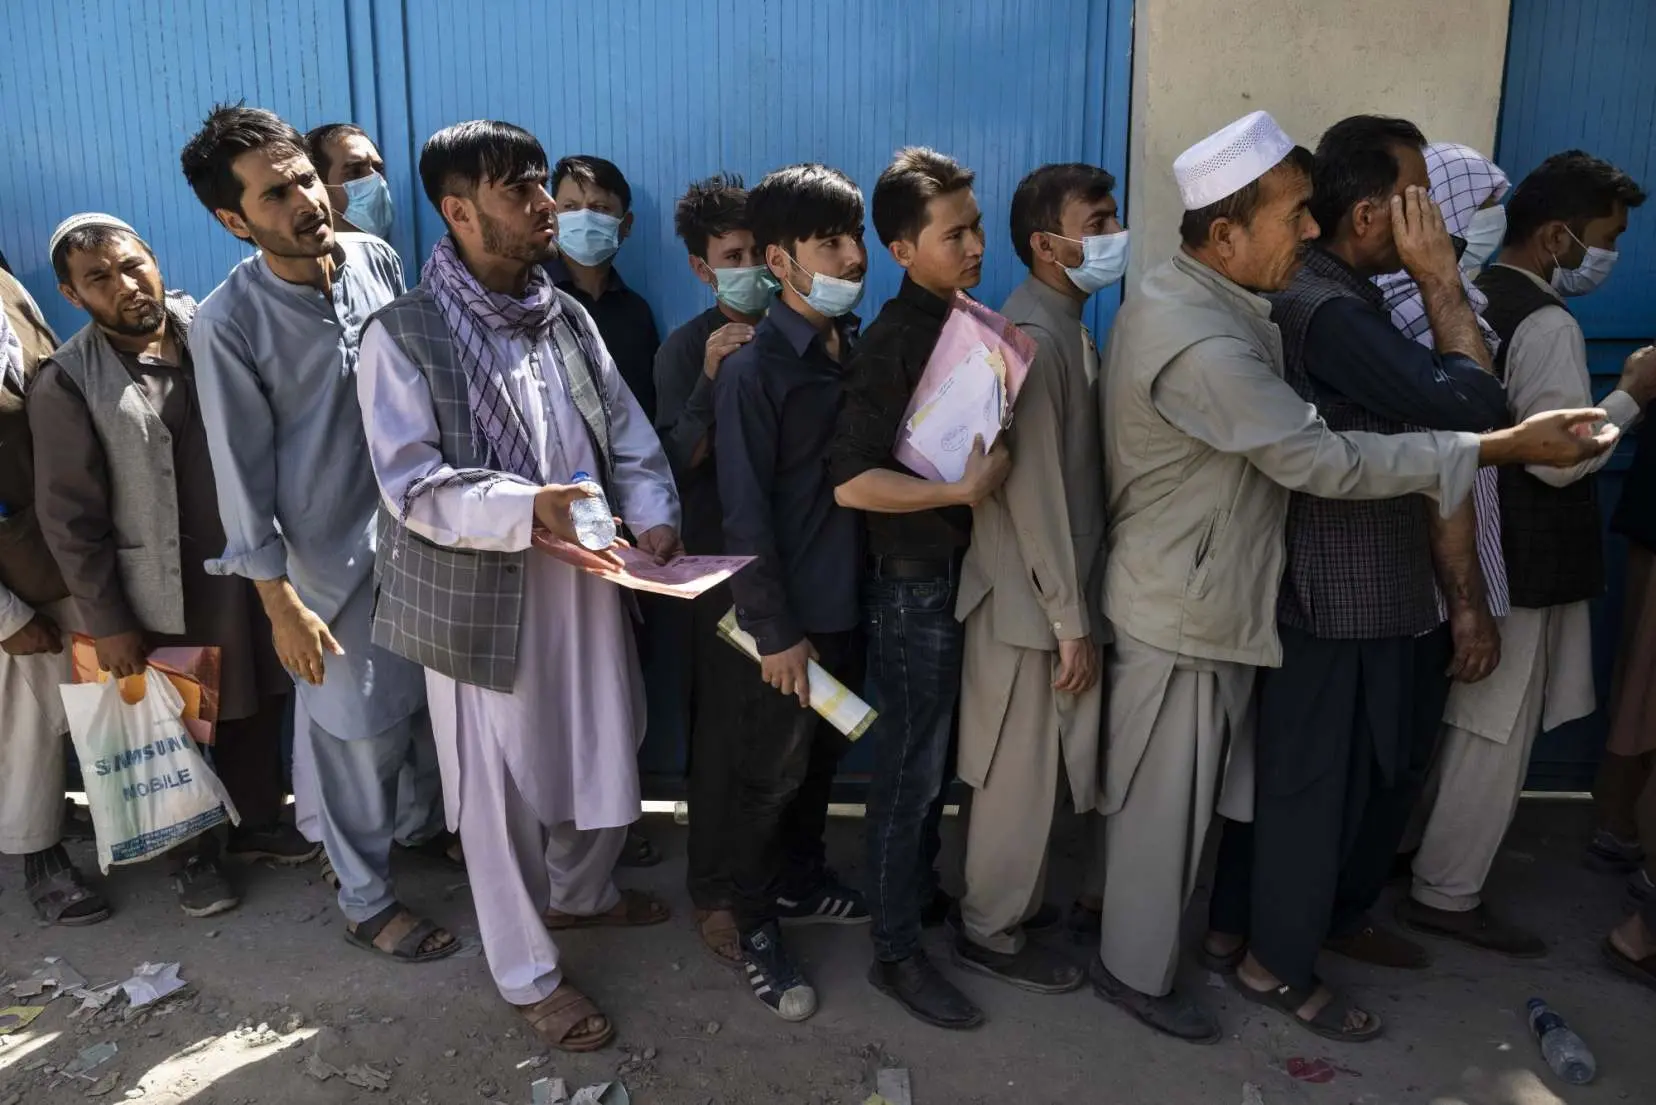 A line of men wait in line with visa documents